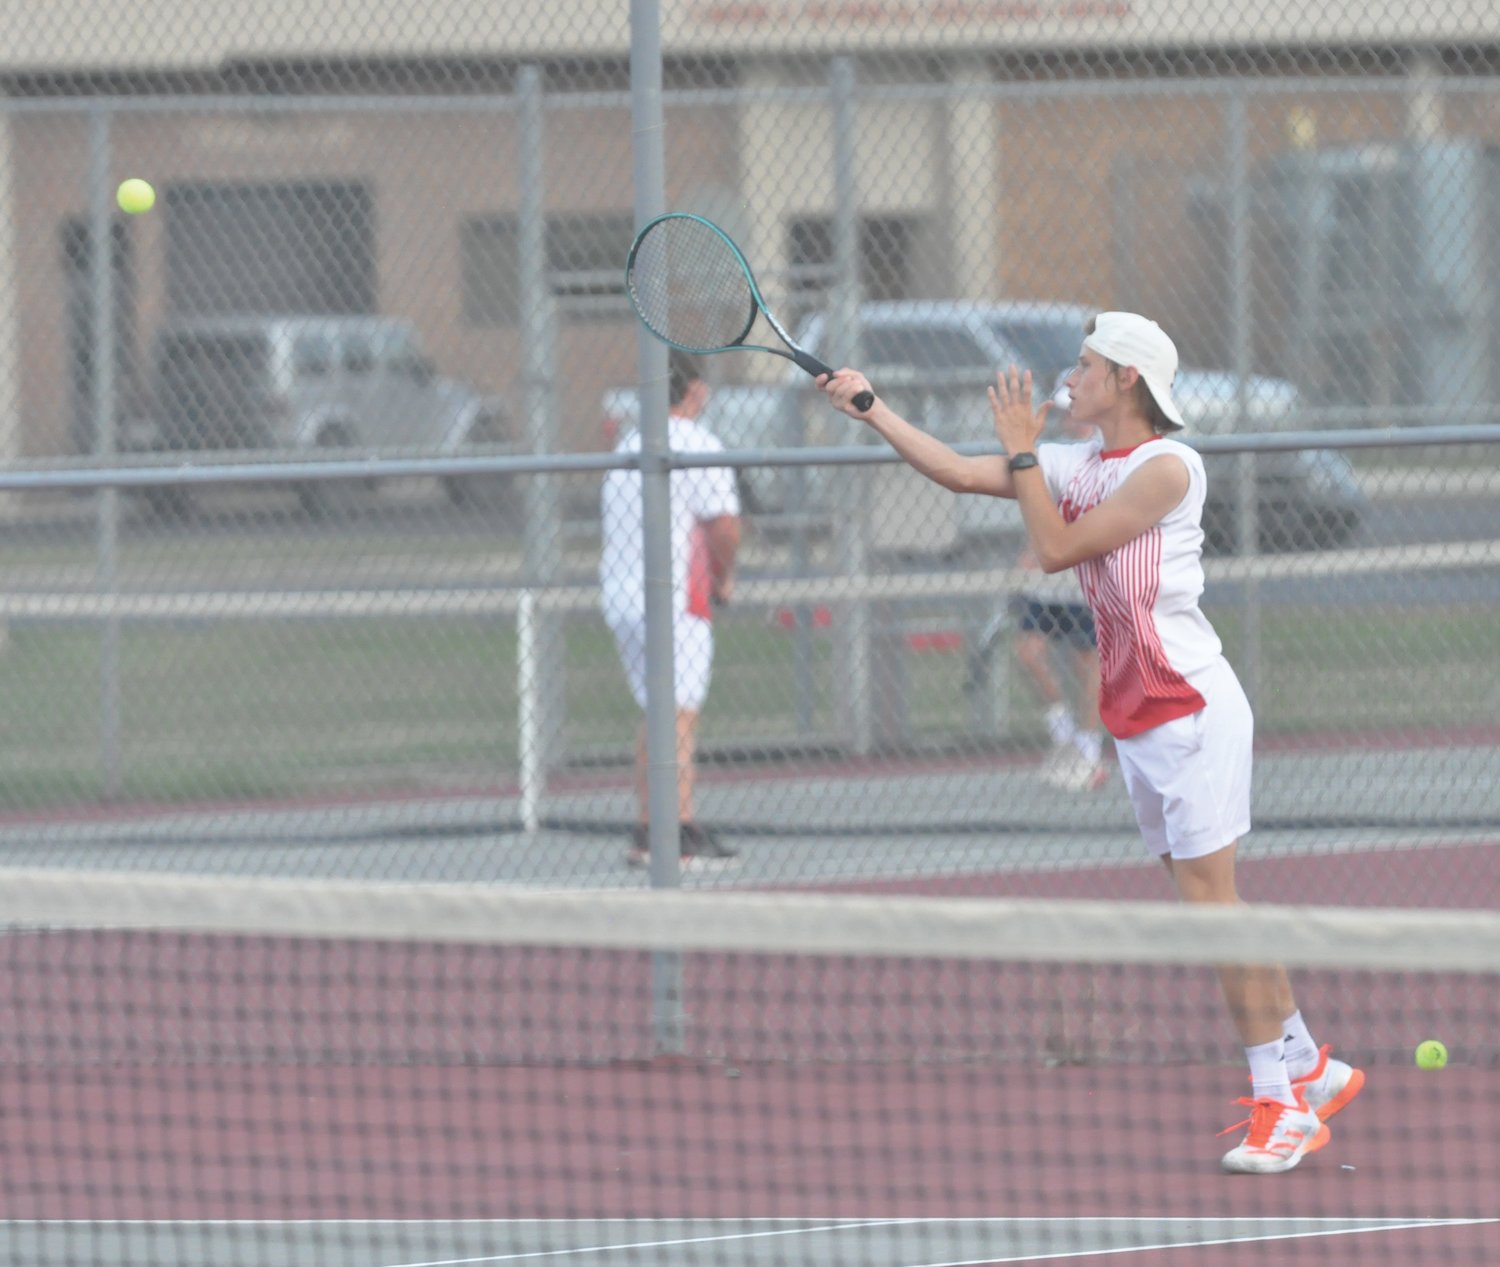 Southmont's Luke Tesmer defeated Fountain Central's Brayden Prickett on Monday night at No. 2 singles.